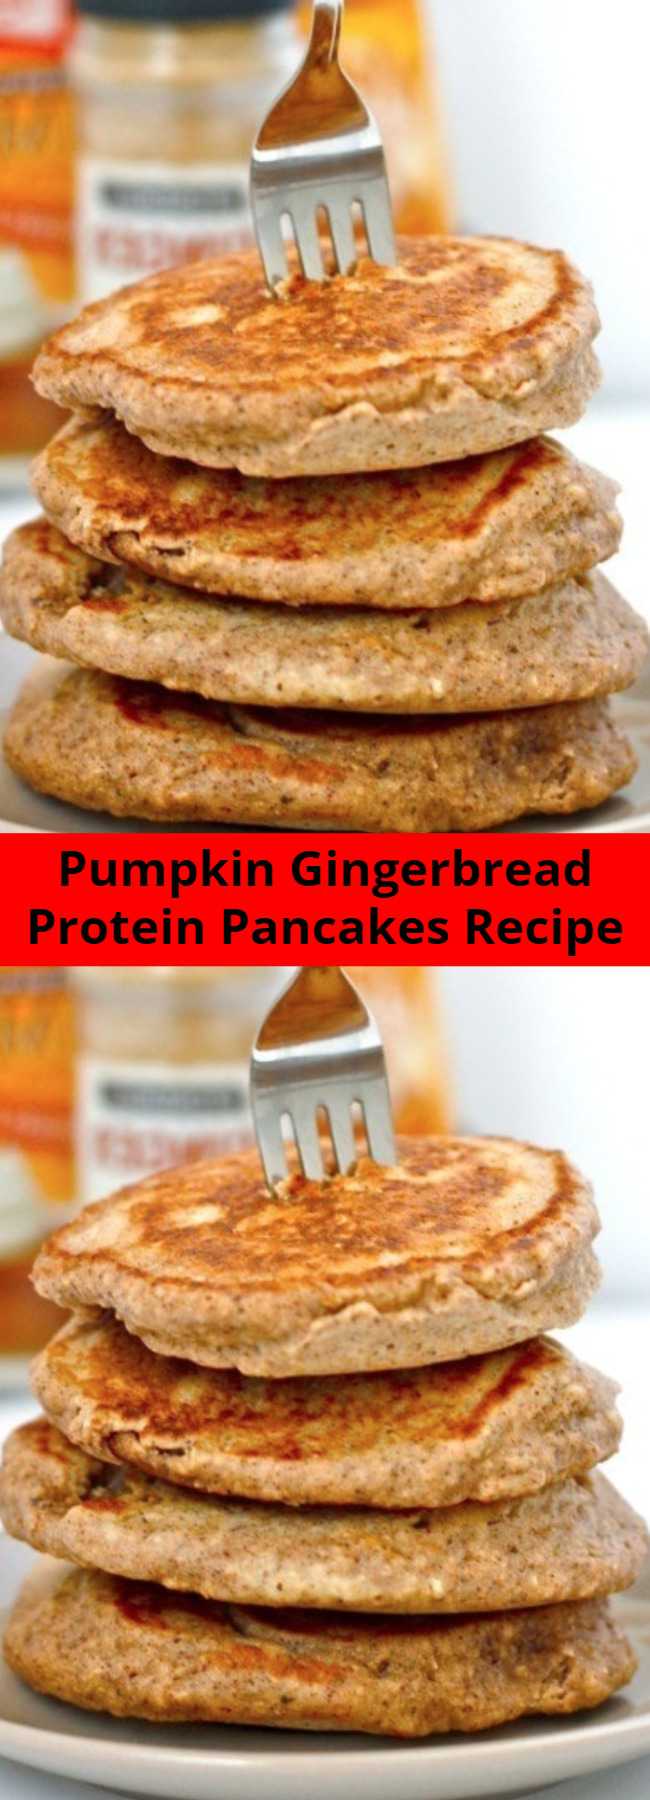 Pumpkin Gingerbread Protein Pancakes Recipe - Hands down, the fluffiest pancakes you’ll ever make which are so healthy and filling! High in protein, gluten free, dairy free, sugar free and a vegan option, an easy method provides a perfect stack of pancakes every time with a hidden vegetable too!